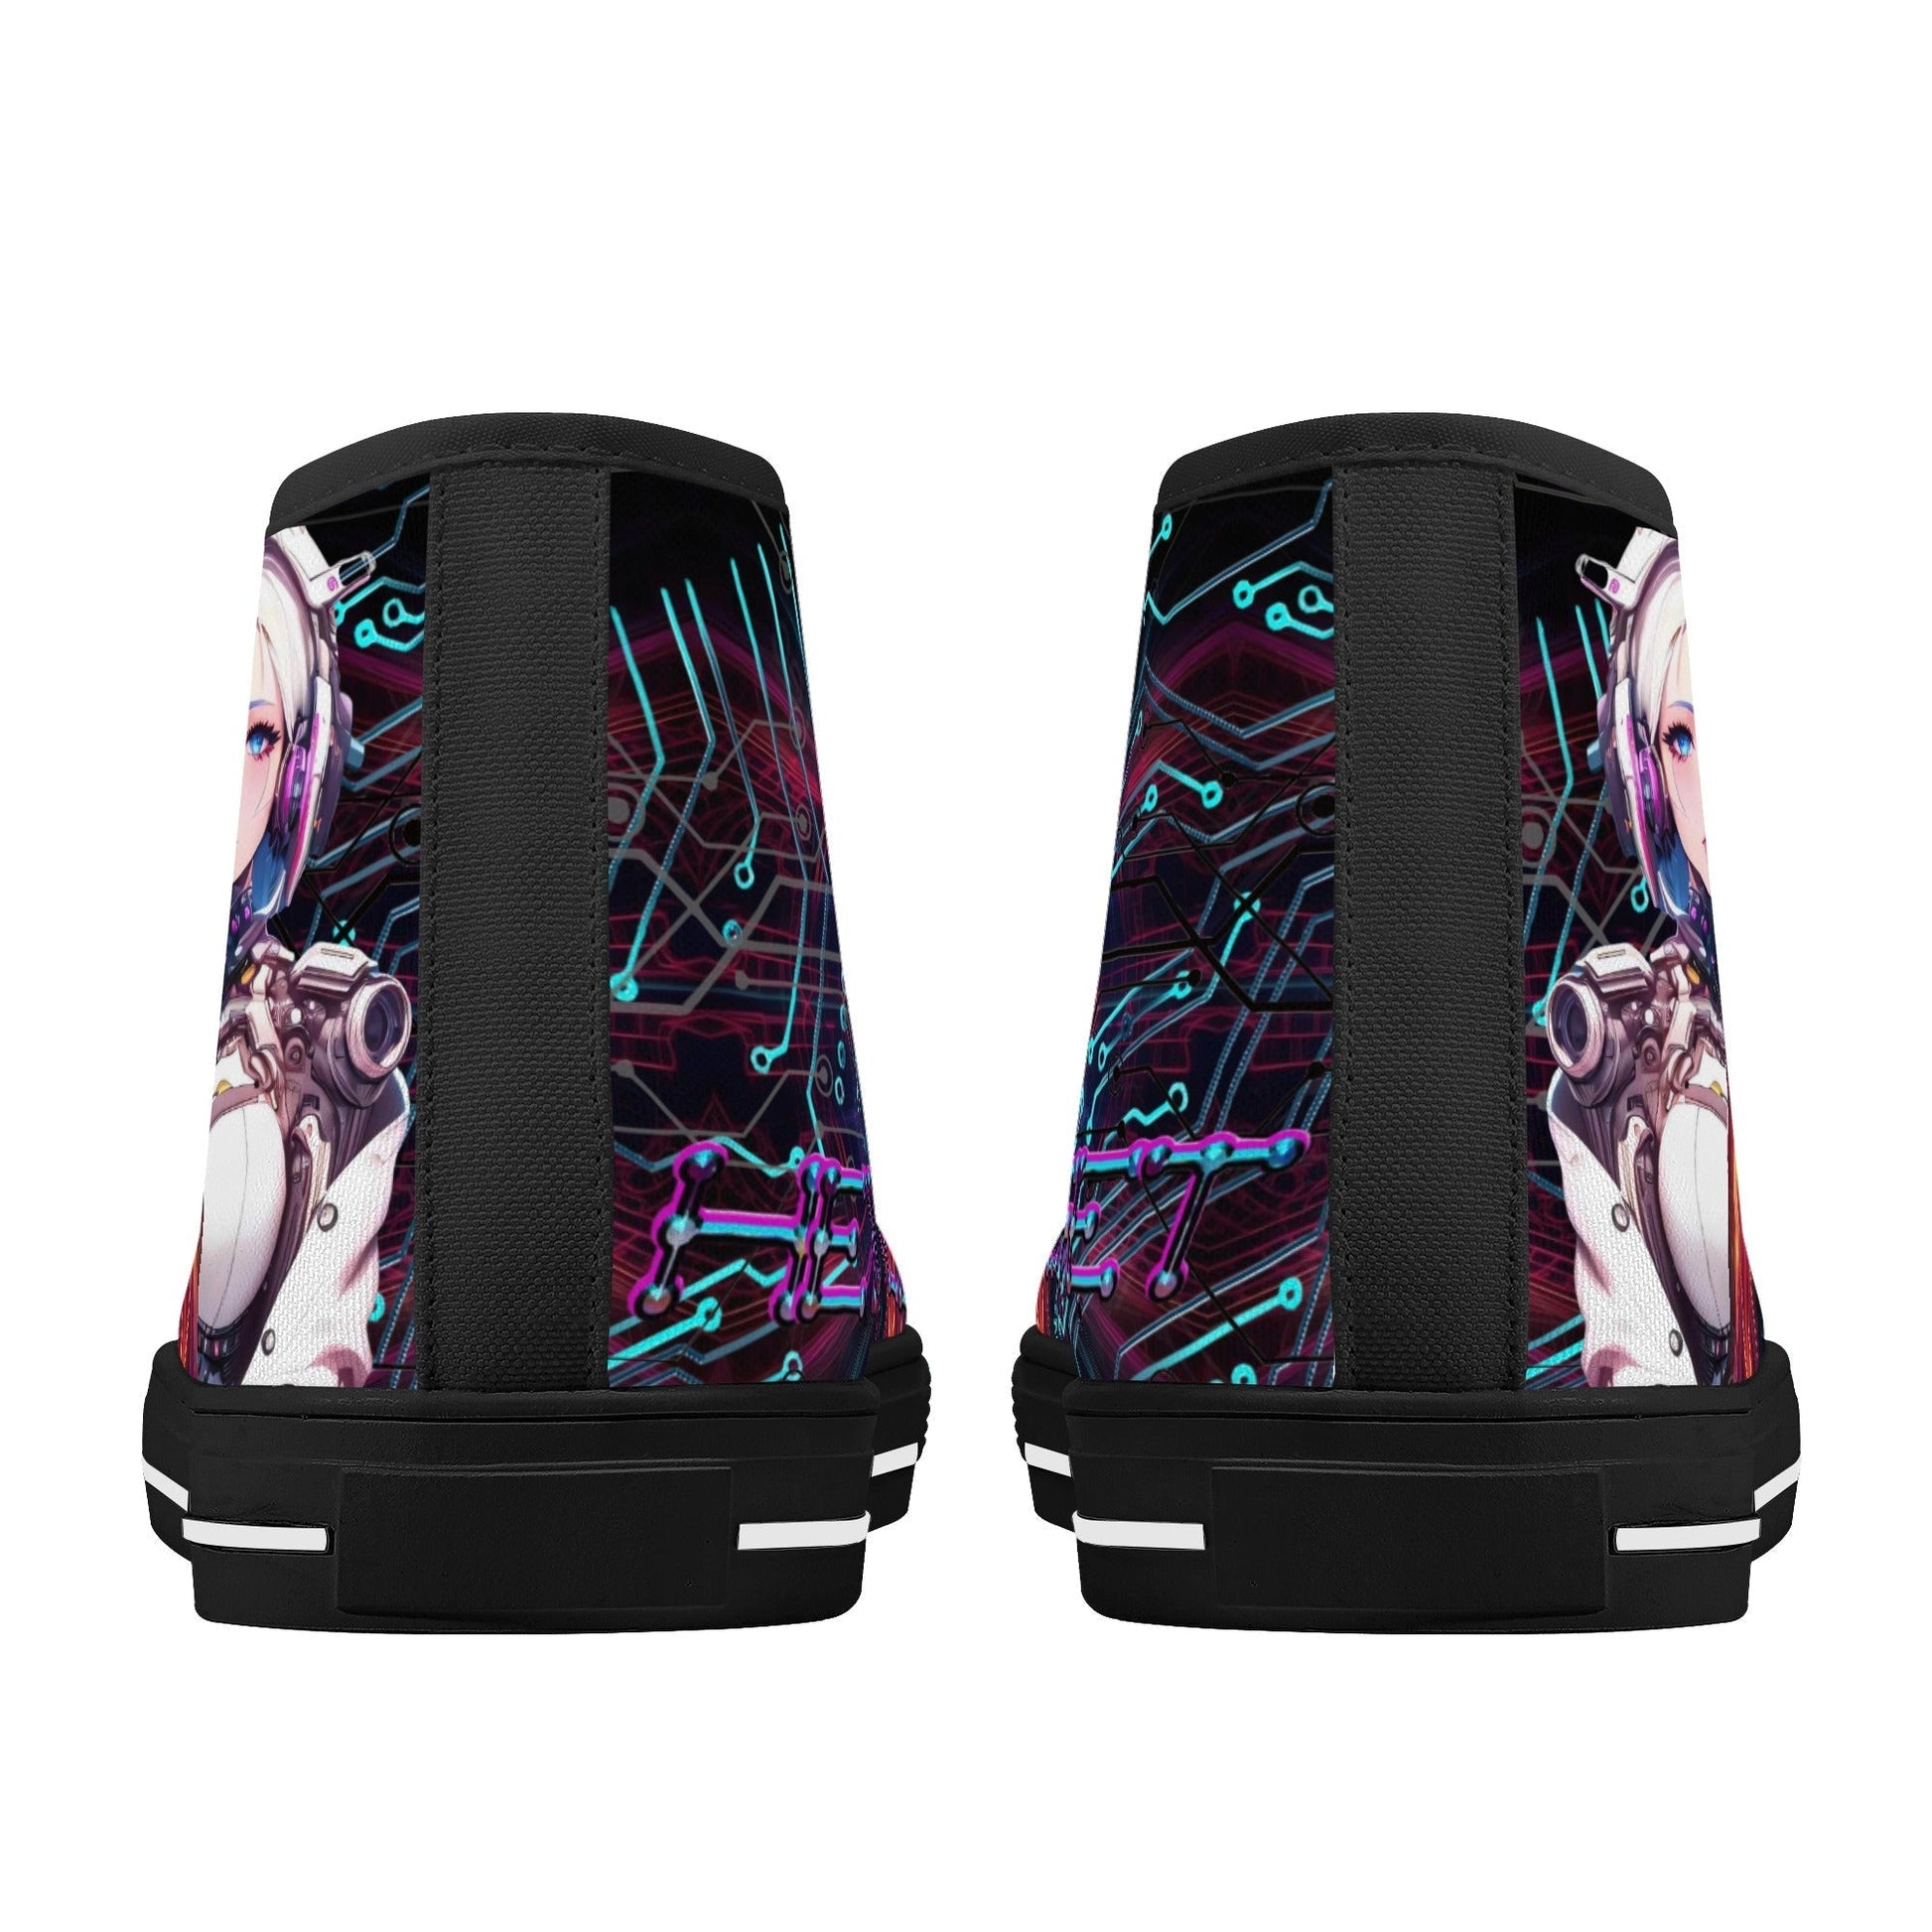 Stand out  with the  Cyber Princess Mens High Top Canvas Shoes  available at Hey Nugget. Grab yours today!